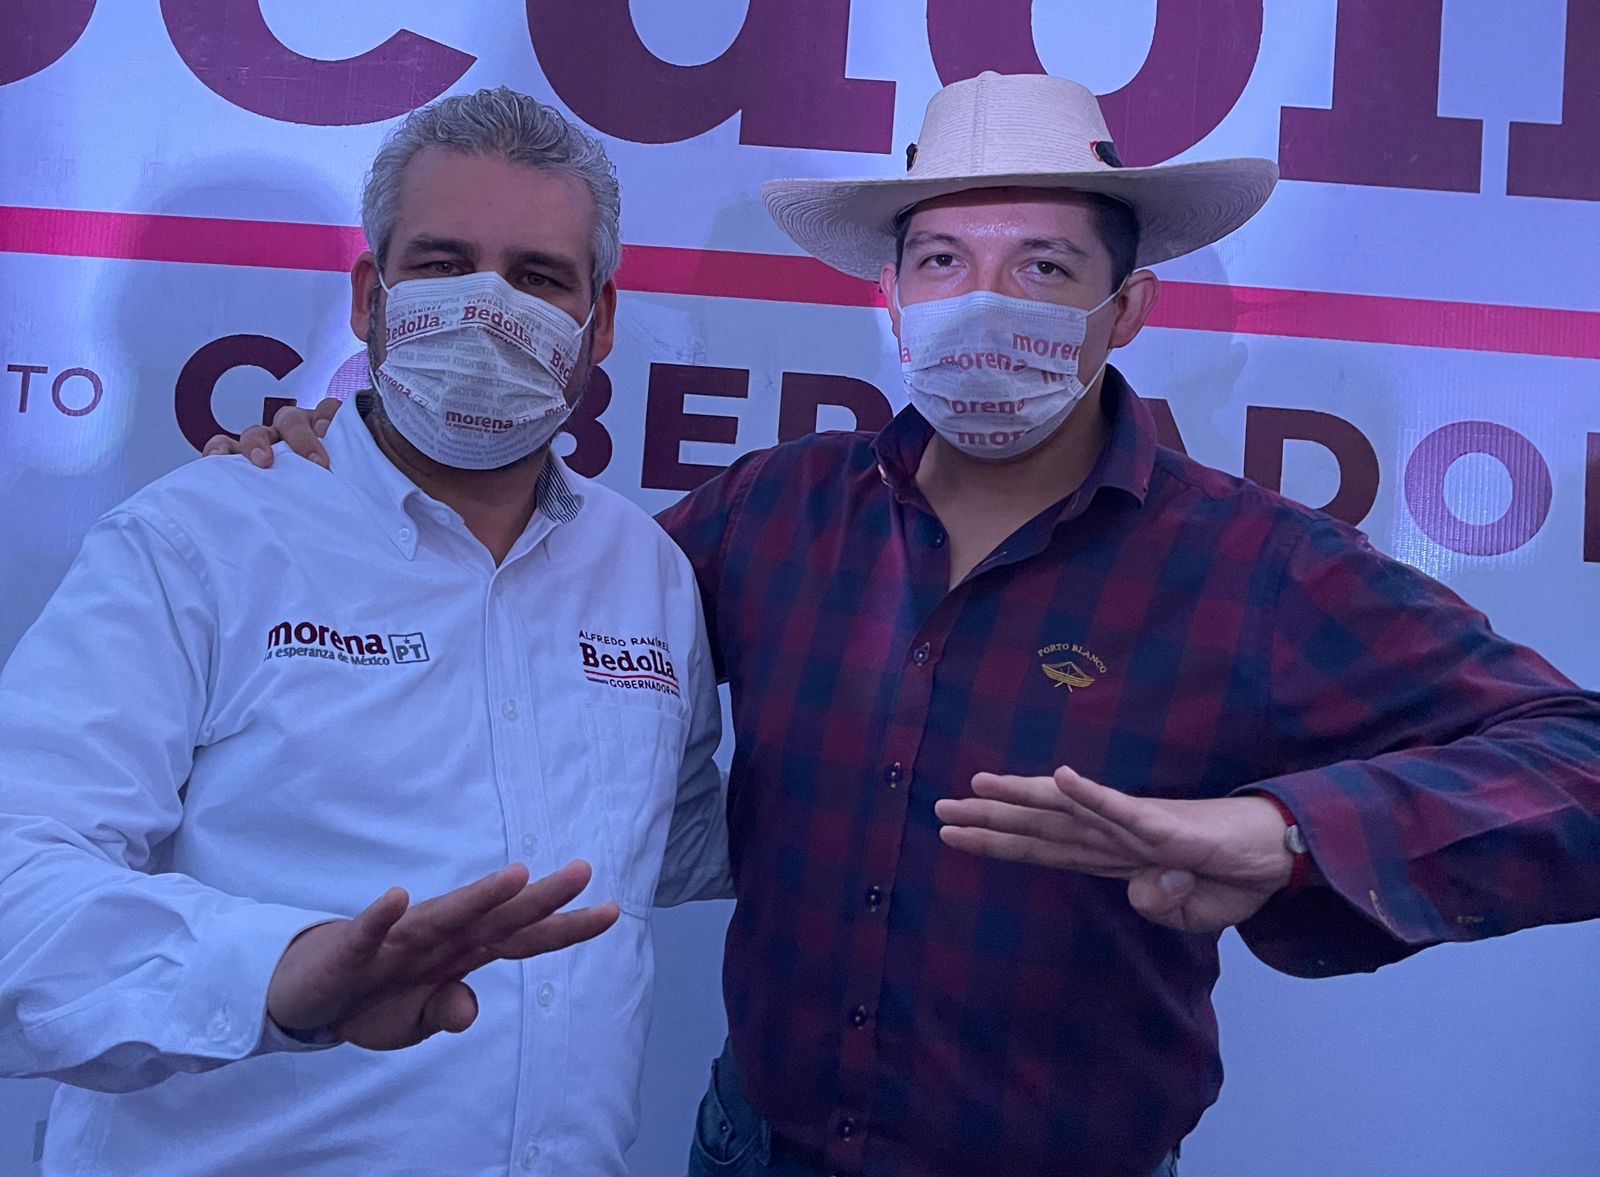 With Alfredo Bedolla's participation in the debate, morena's strength in Michoacán was noticed